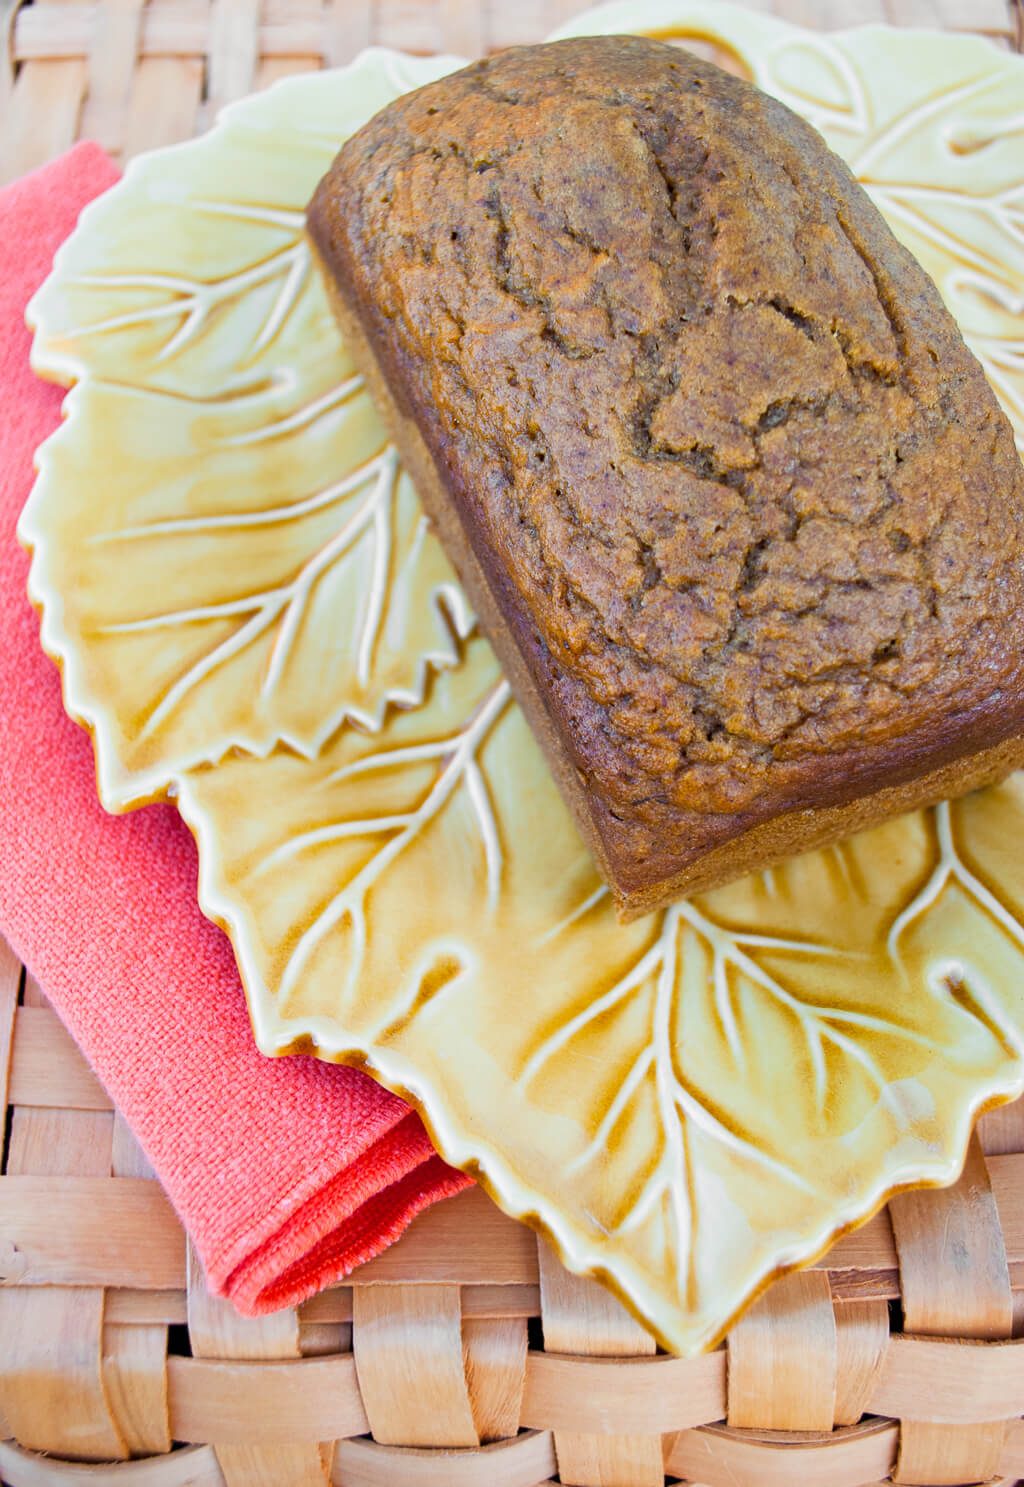 Pumpkin banana bread recipe with less sugar, coconut oil, healthier flours and pumpkin pie spices. Make mini-loaves or full size (I like to make mini-loaves and freeze).